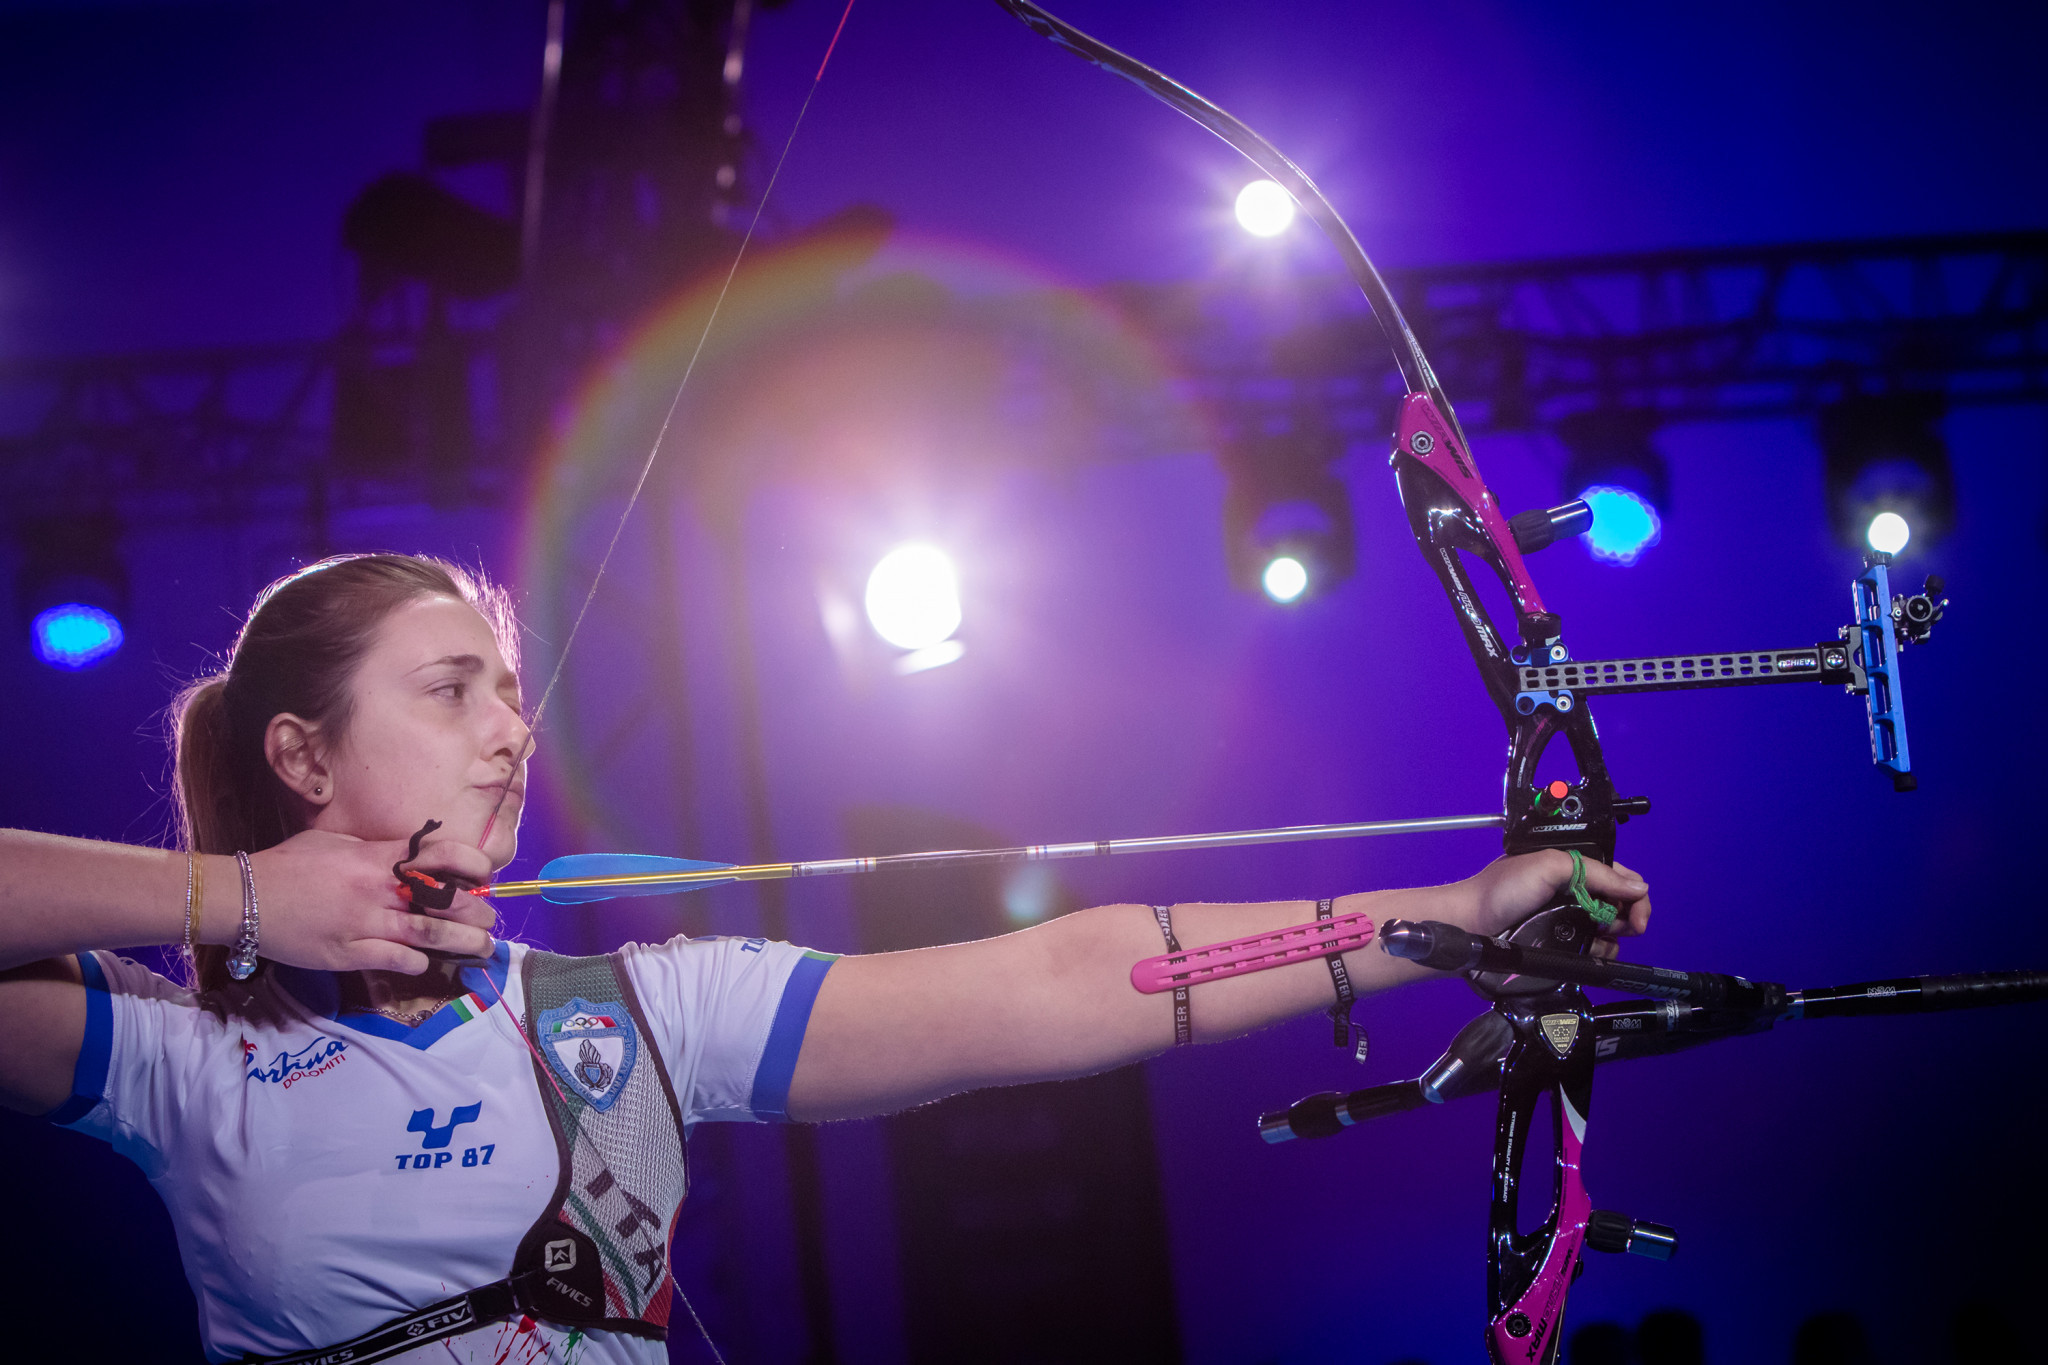 Indoor and field events to contribute to new archery world rankings